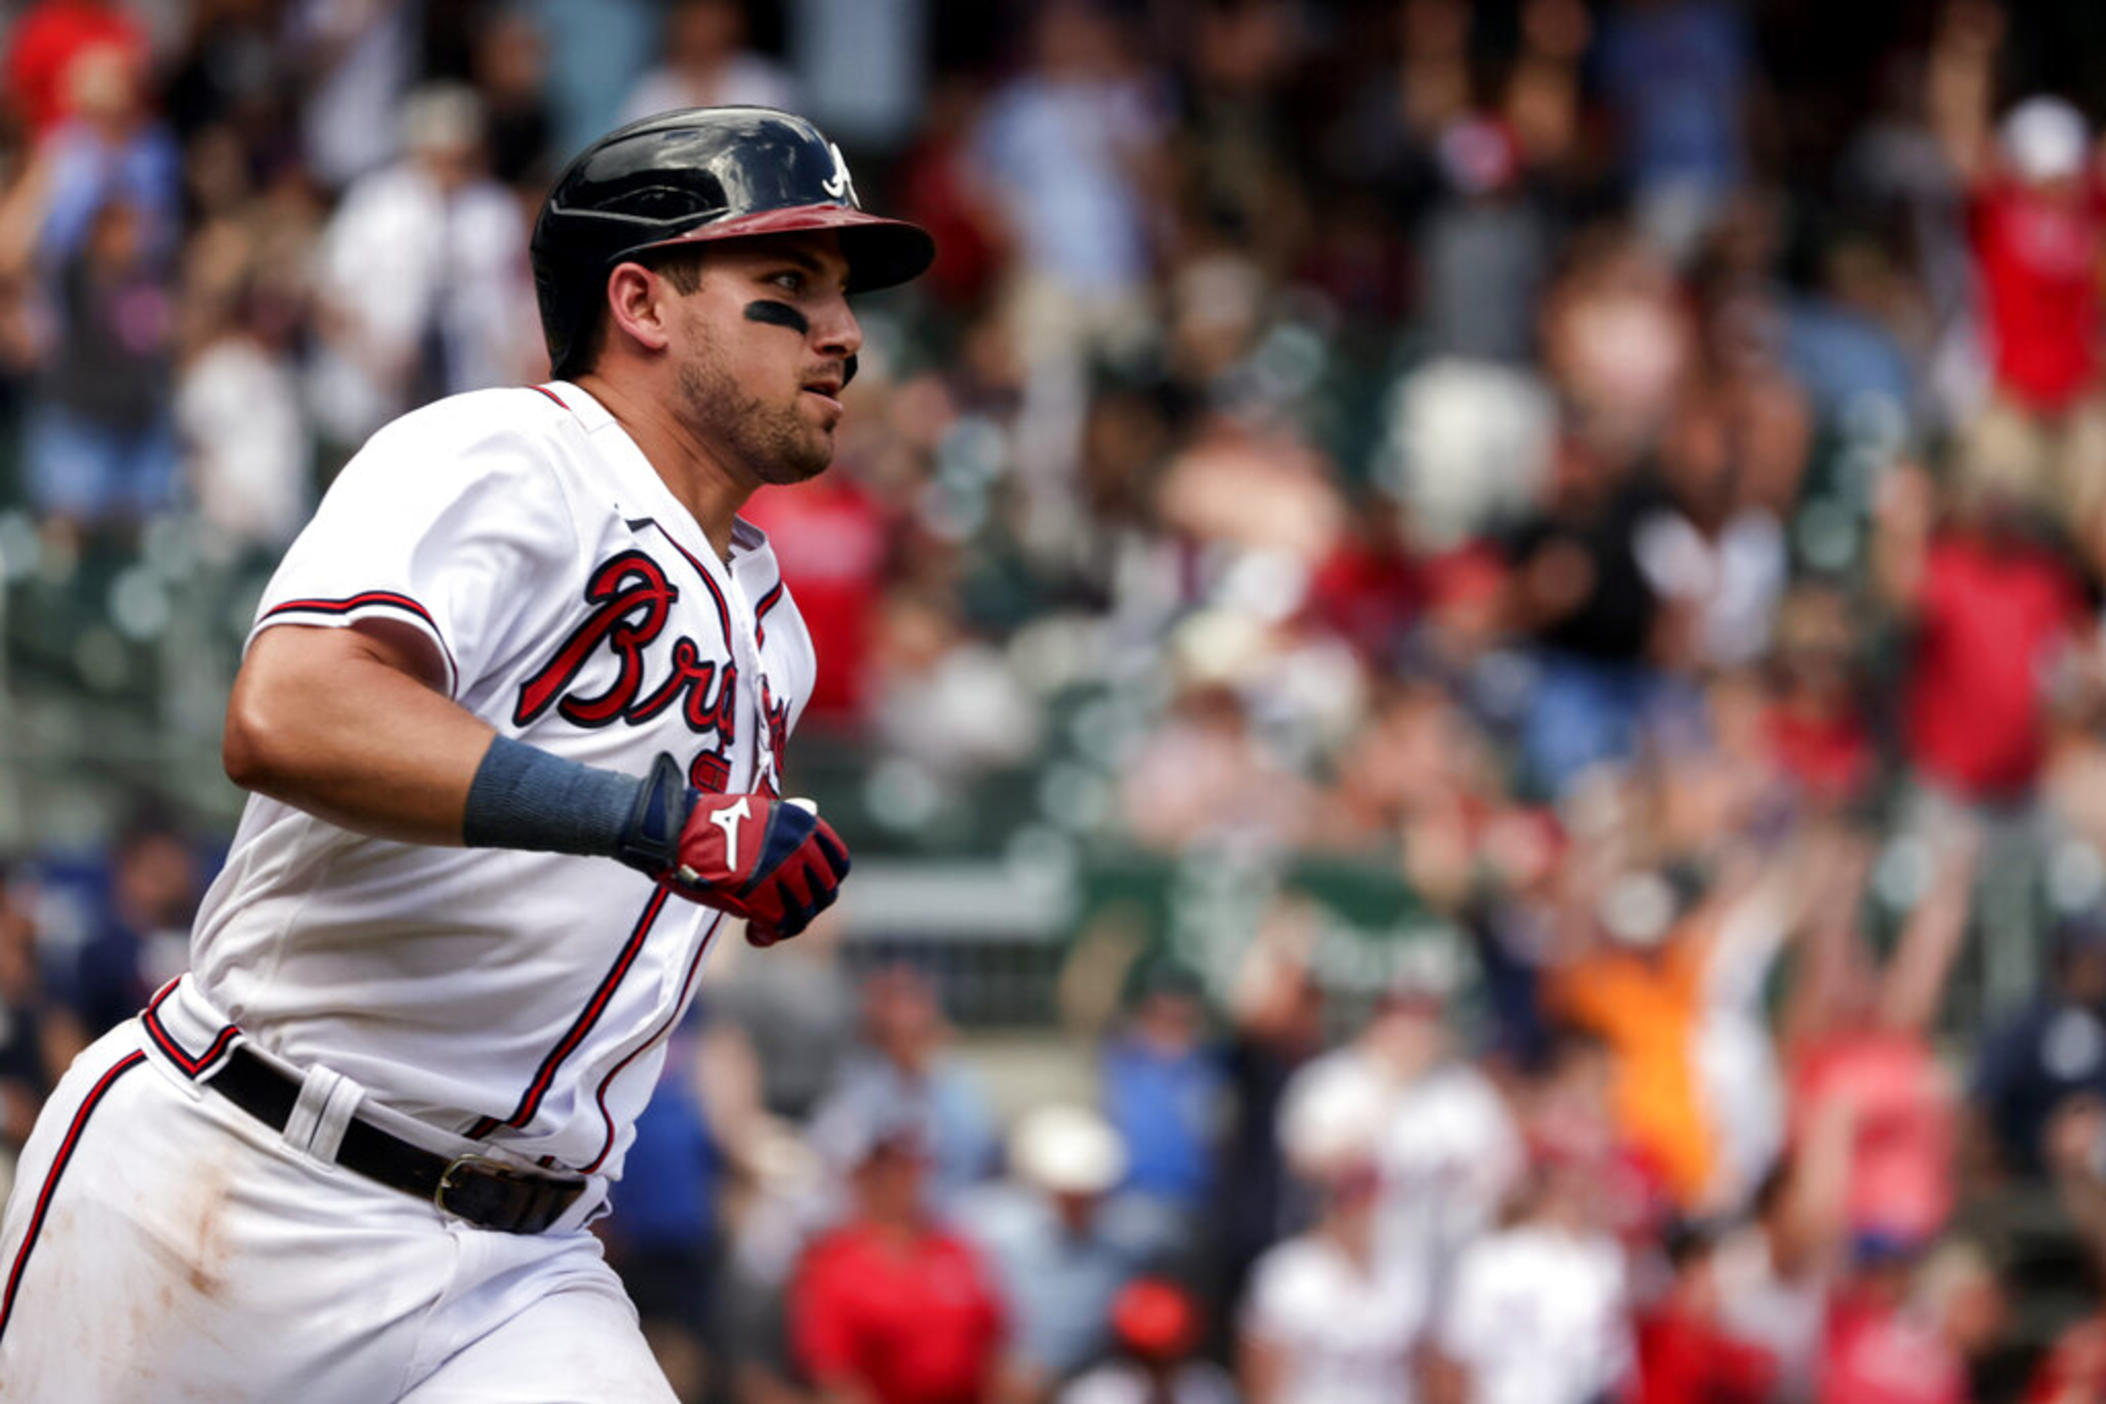 Predicting the stats of each Braves player -- Austin Riley